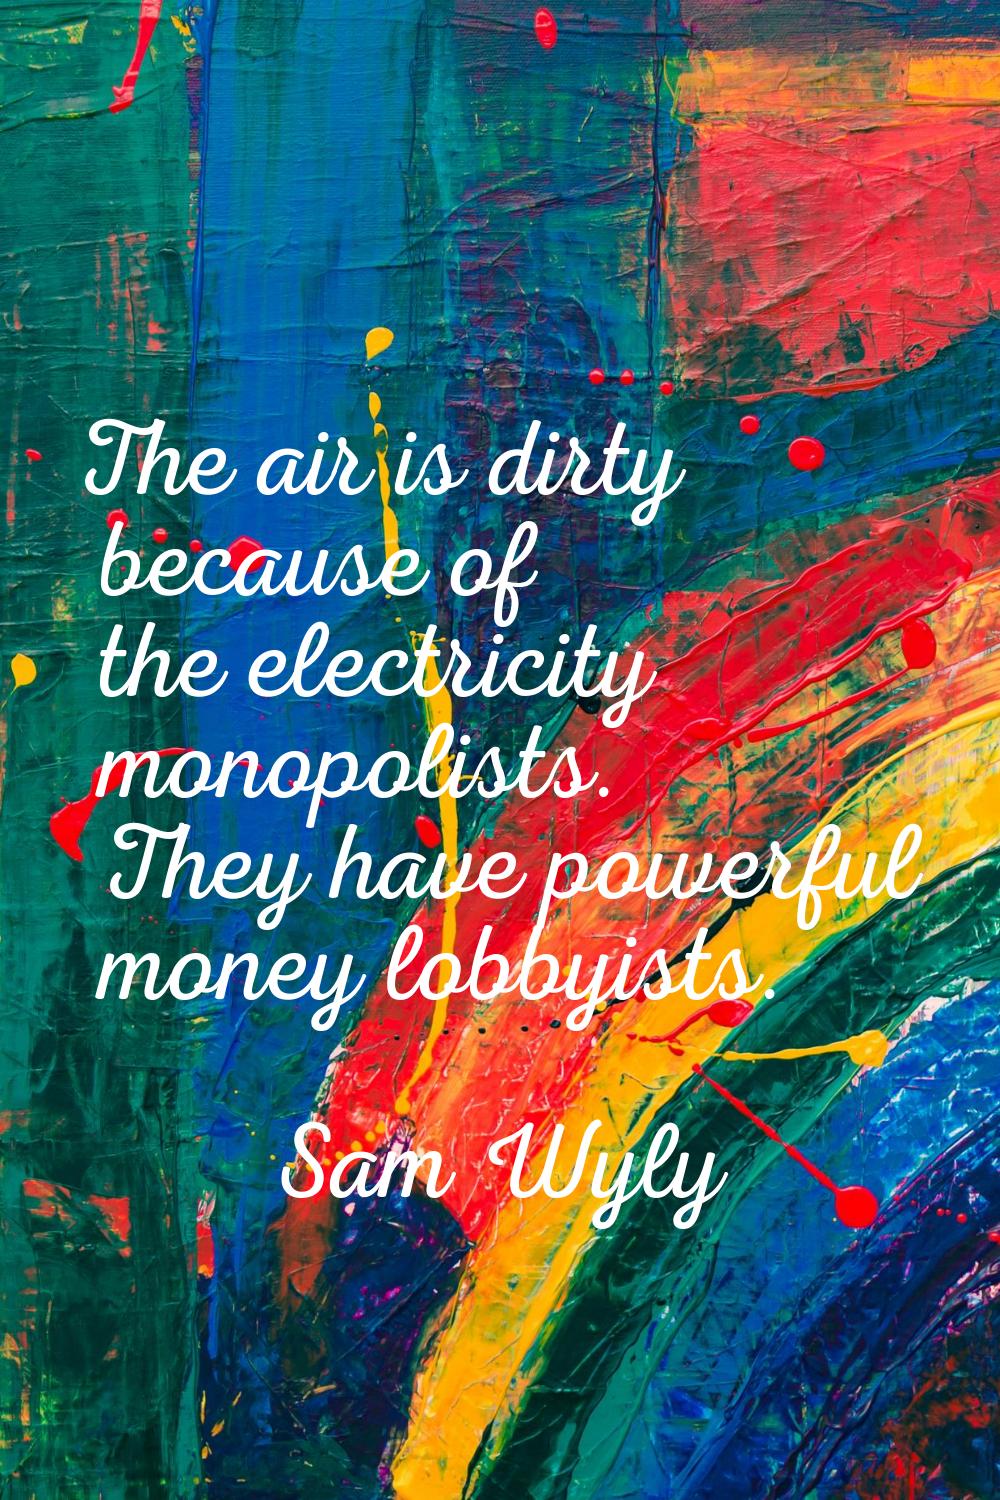 The air is dirty because of the electricity monopolists. They have powerful money lobbyists.